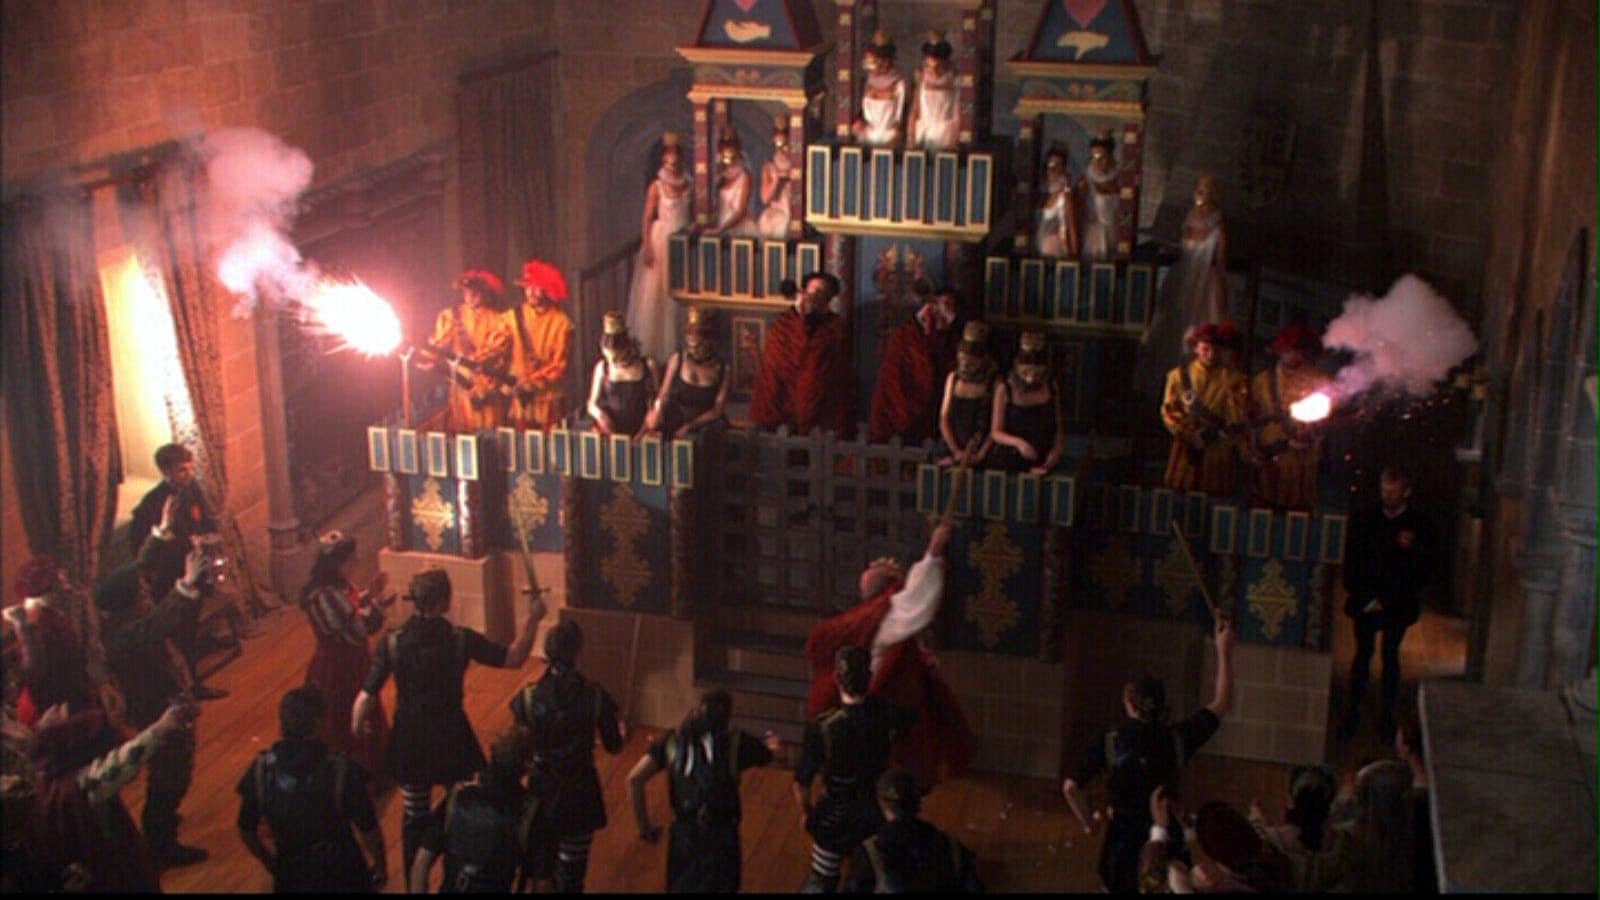 The Chateau Vert pageant in Showtime's "The Tudors"